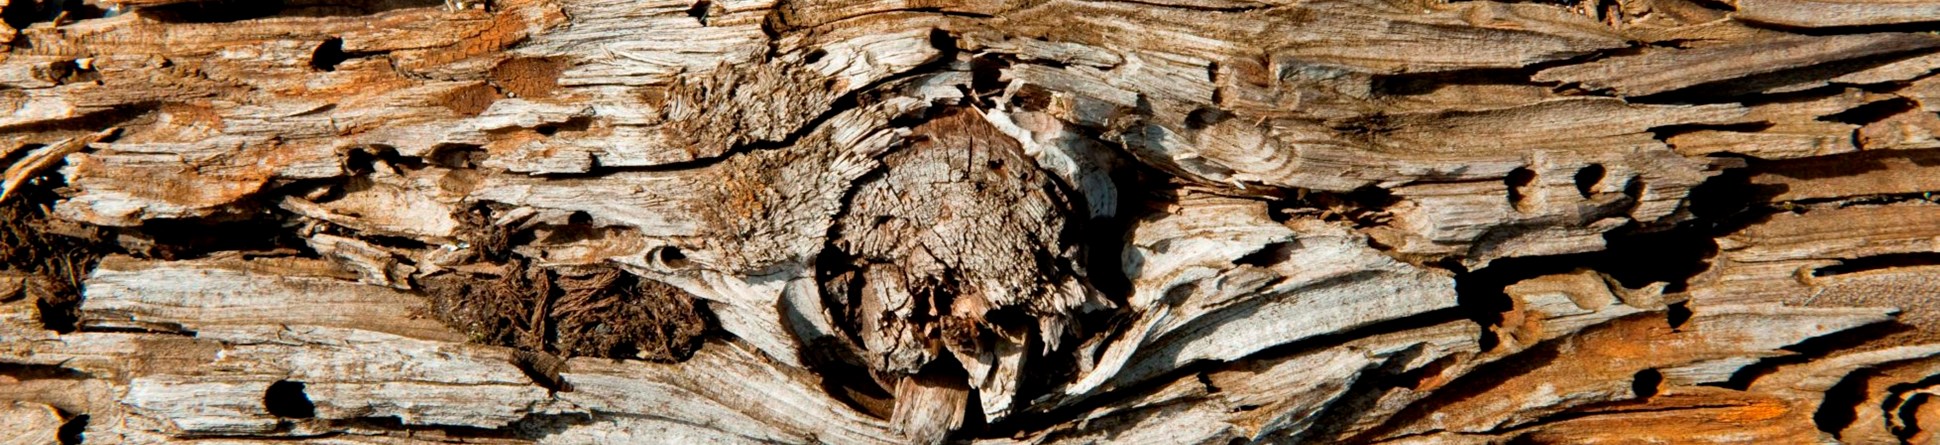 Detail of a timber with holes made by beetles